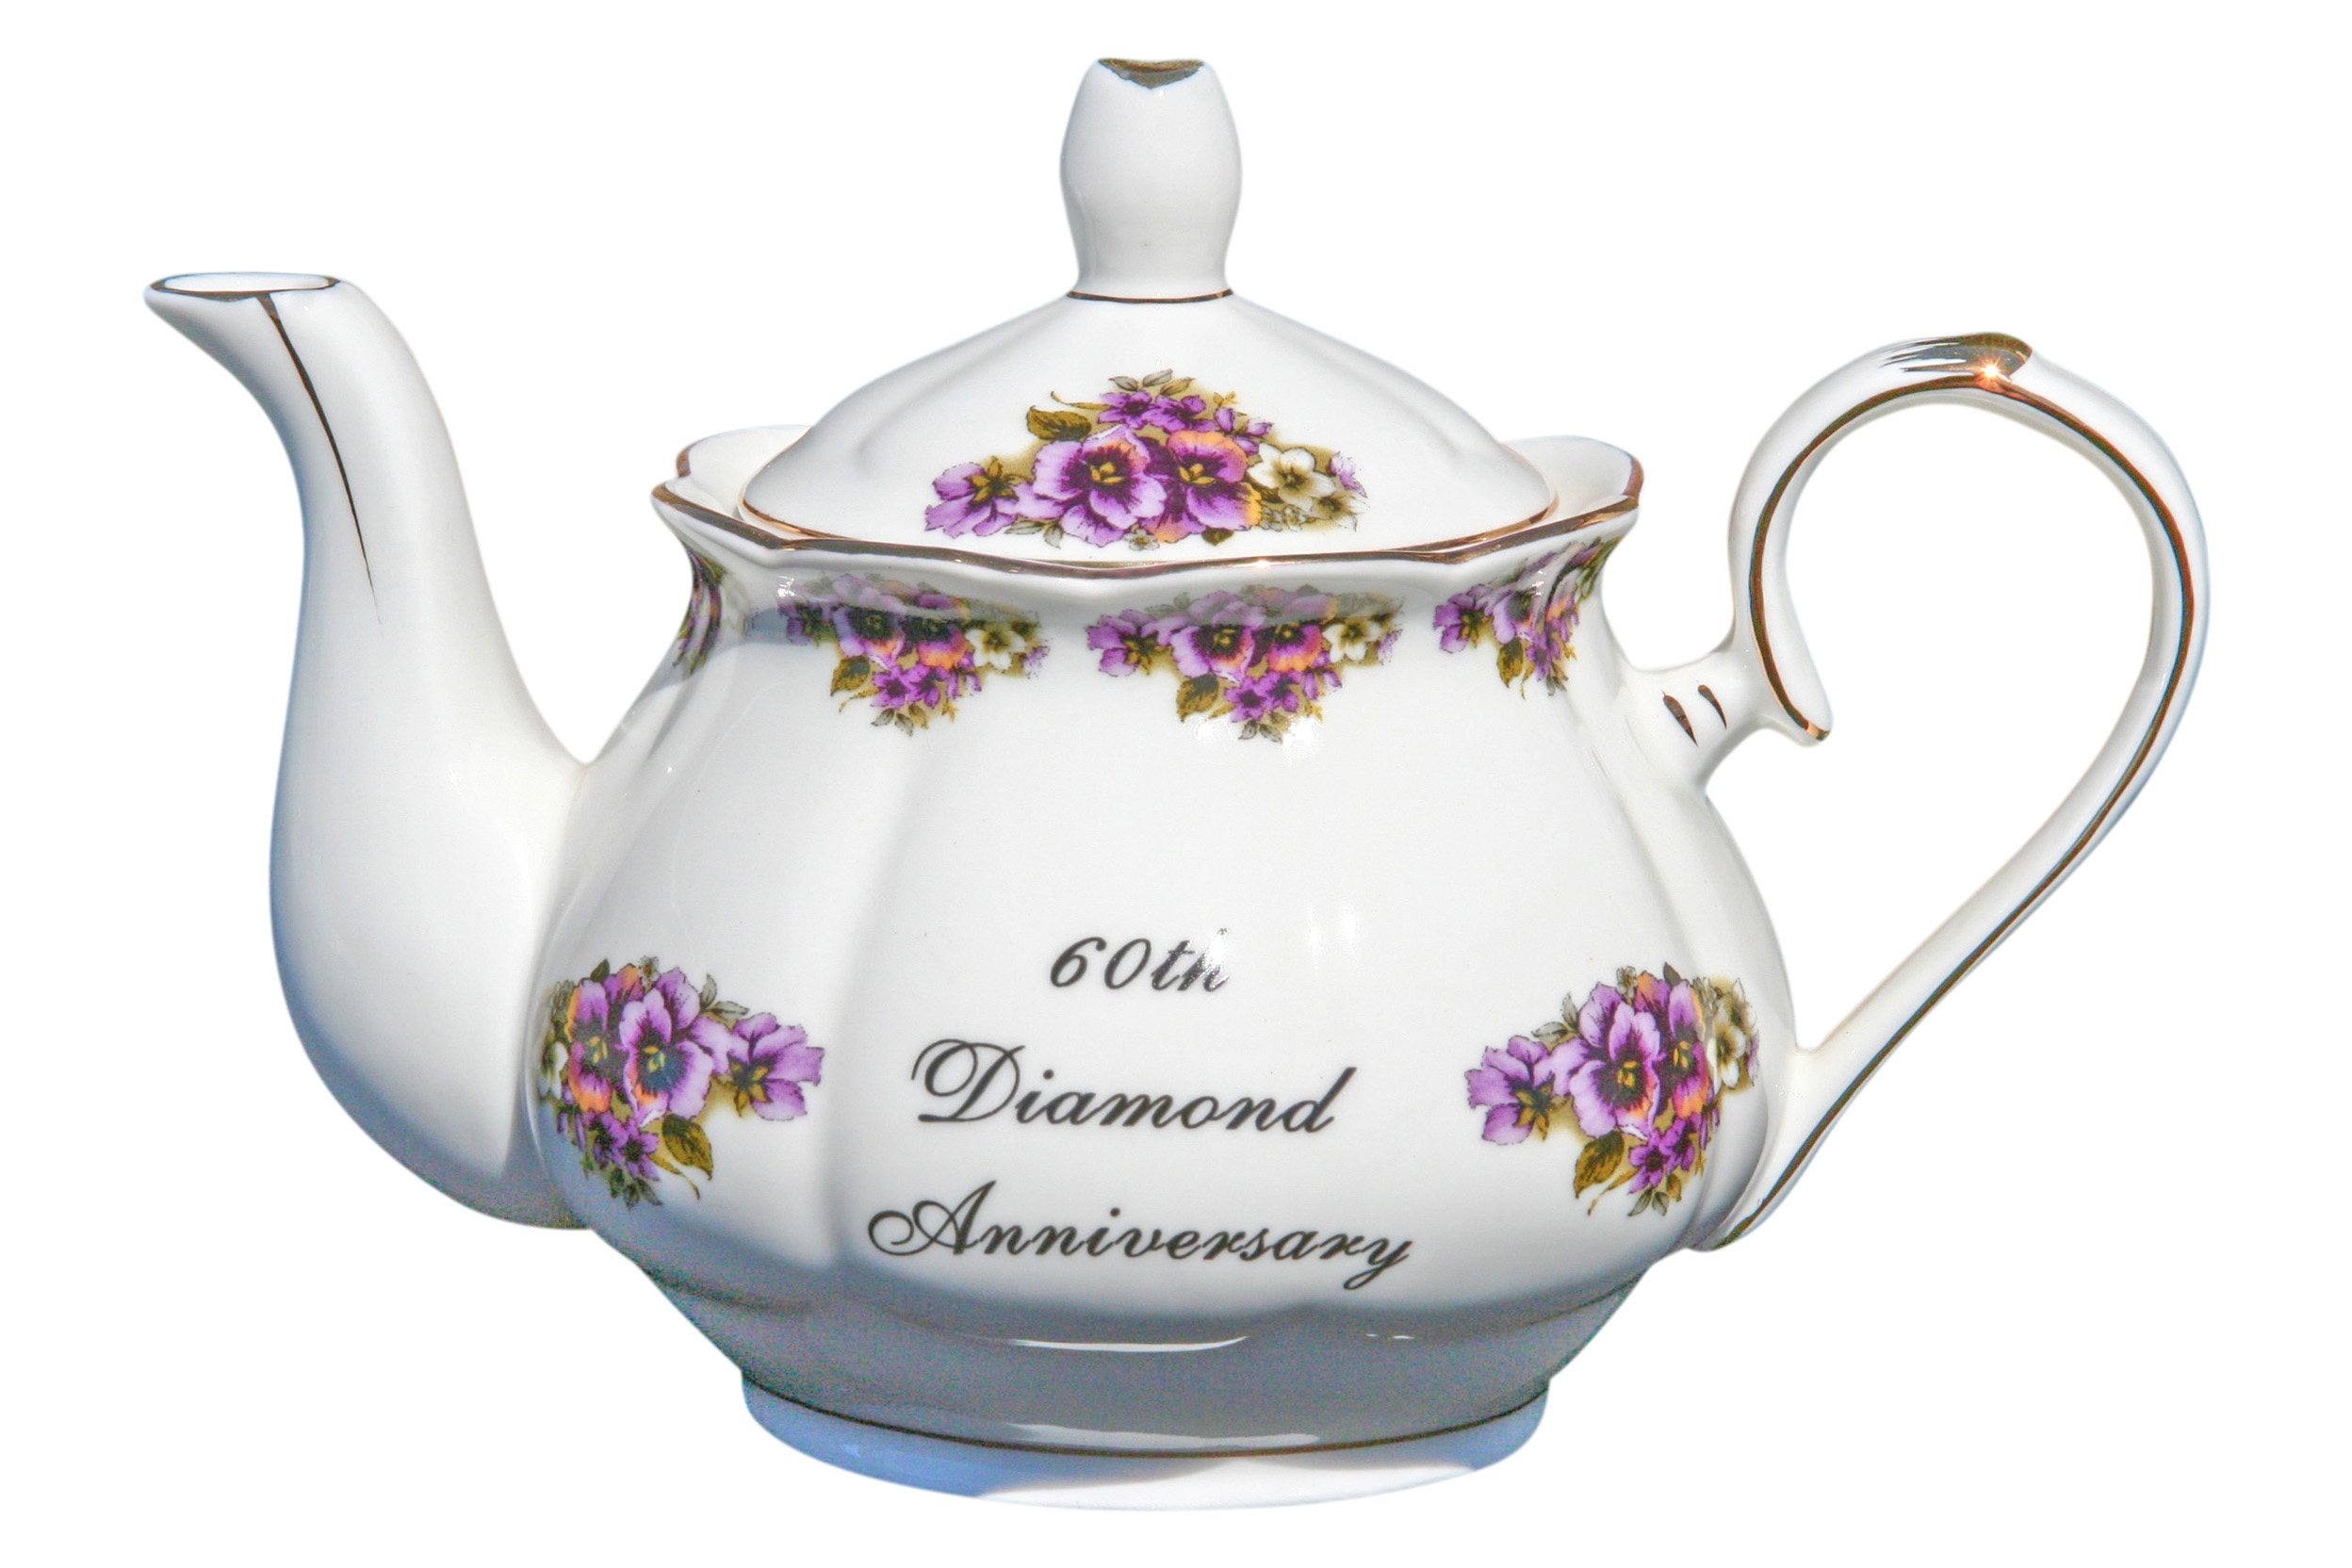 60th Anniversary 2 cup Teapot